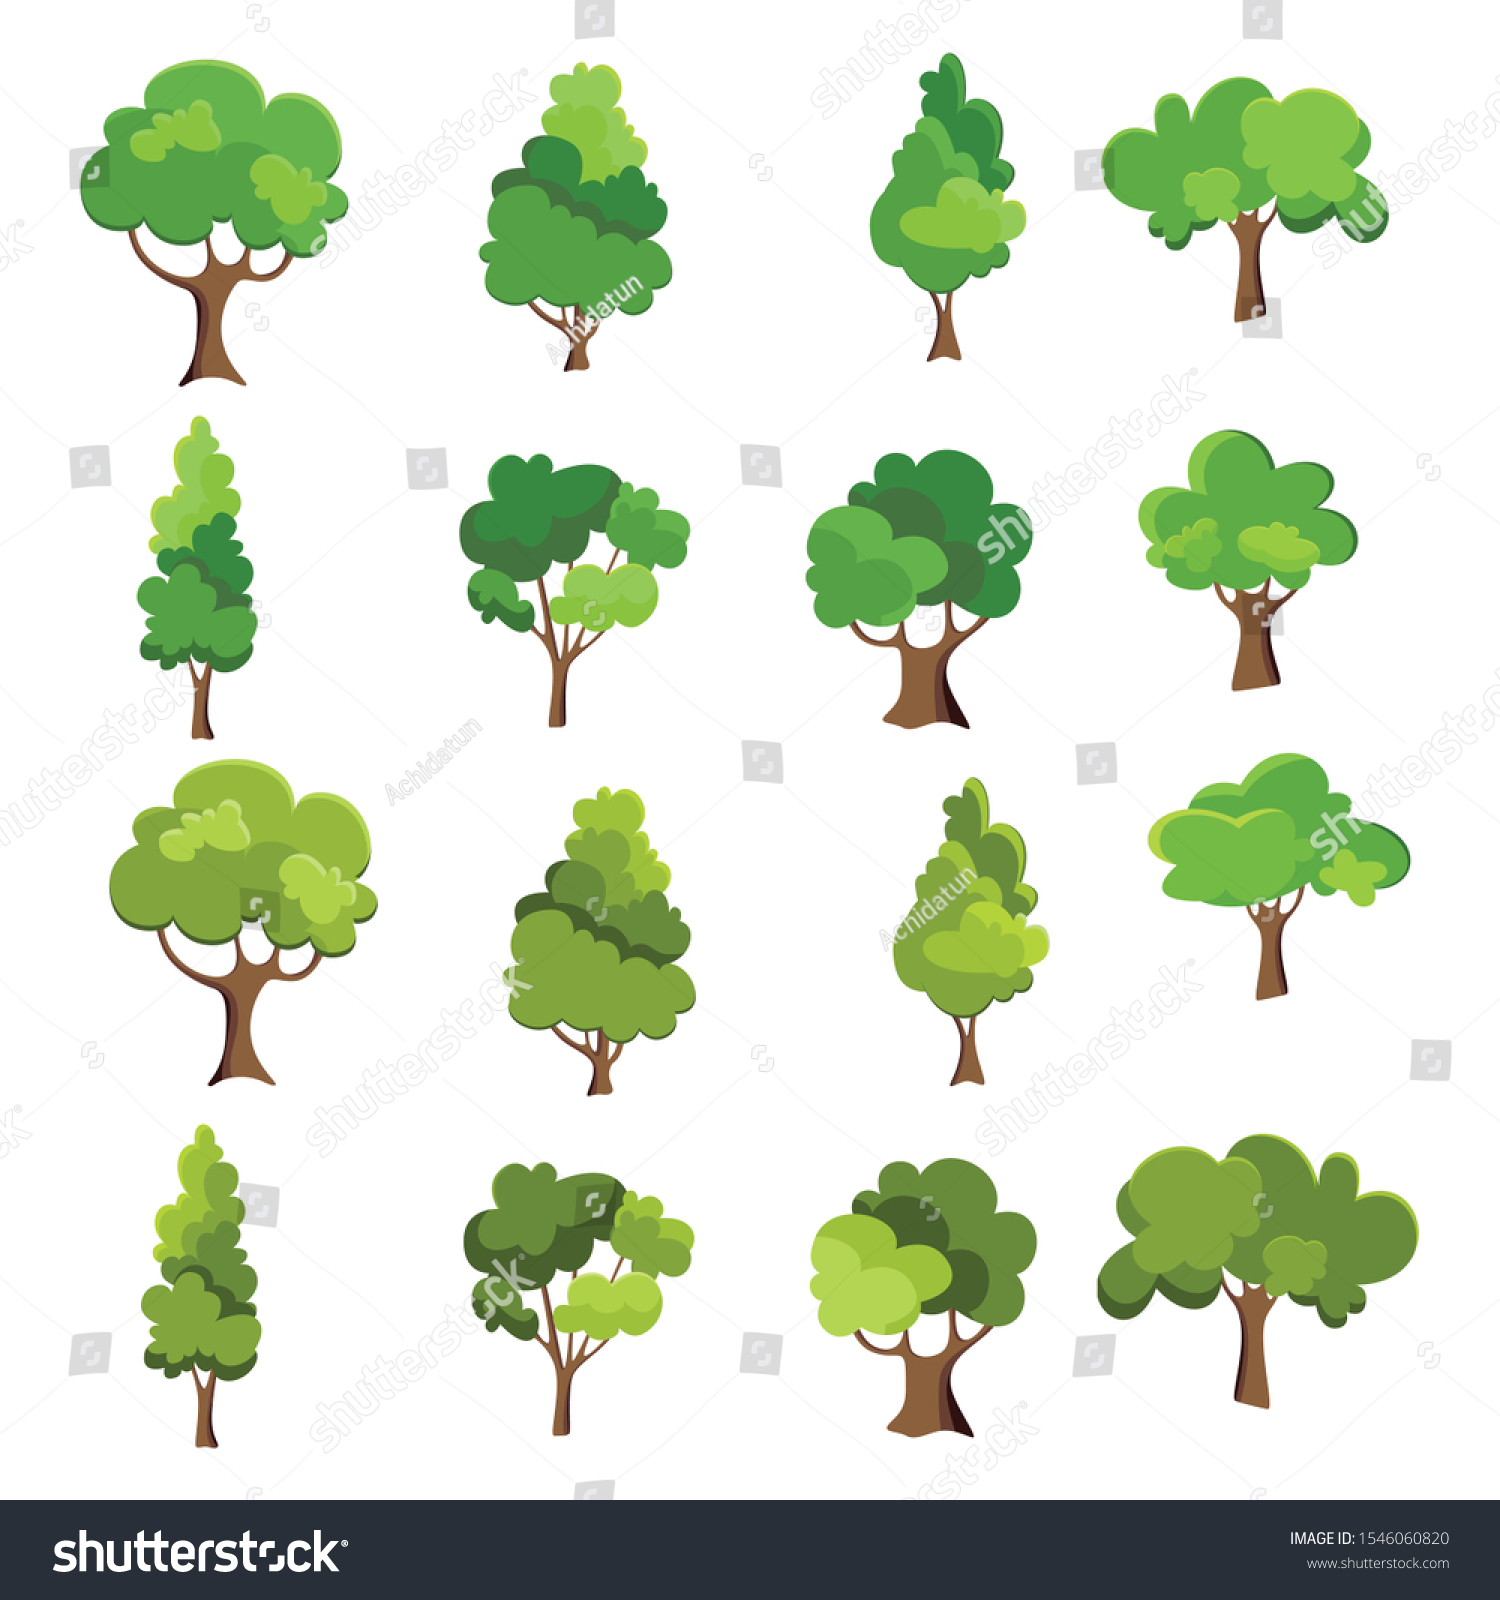 Variety Hand Drawn Deciduous Trees Illustration Stock Vector (Royalty ...